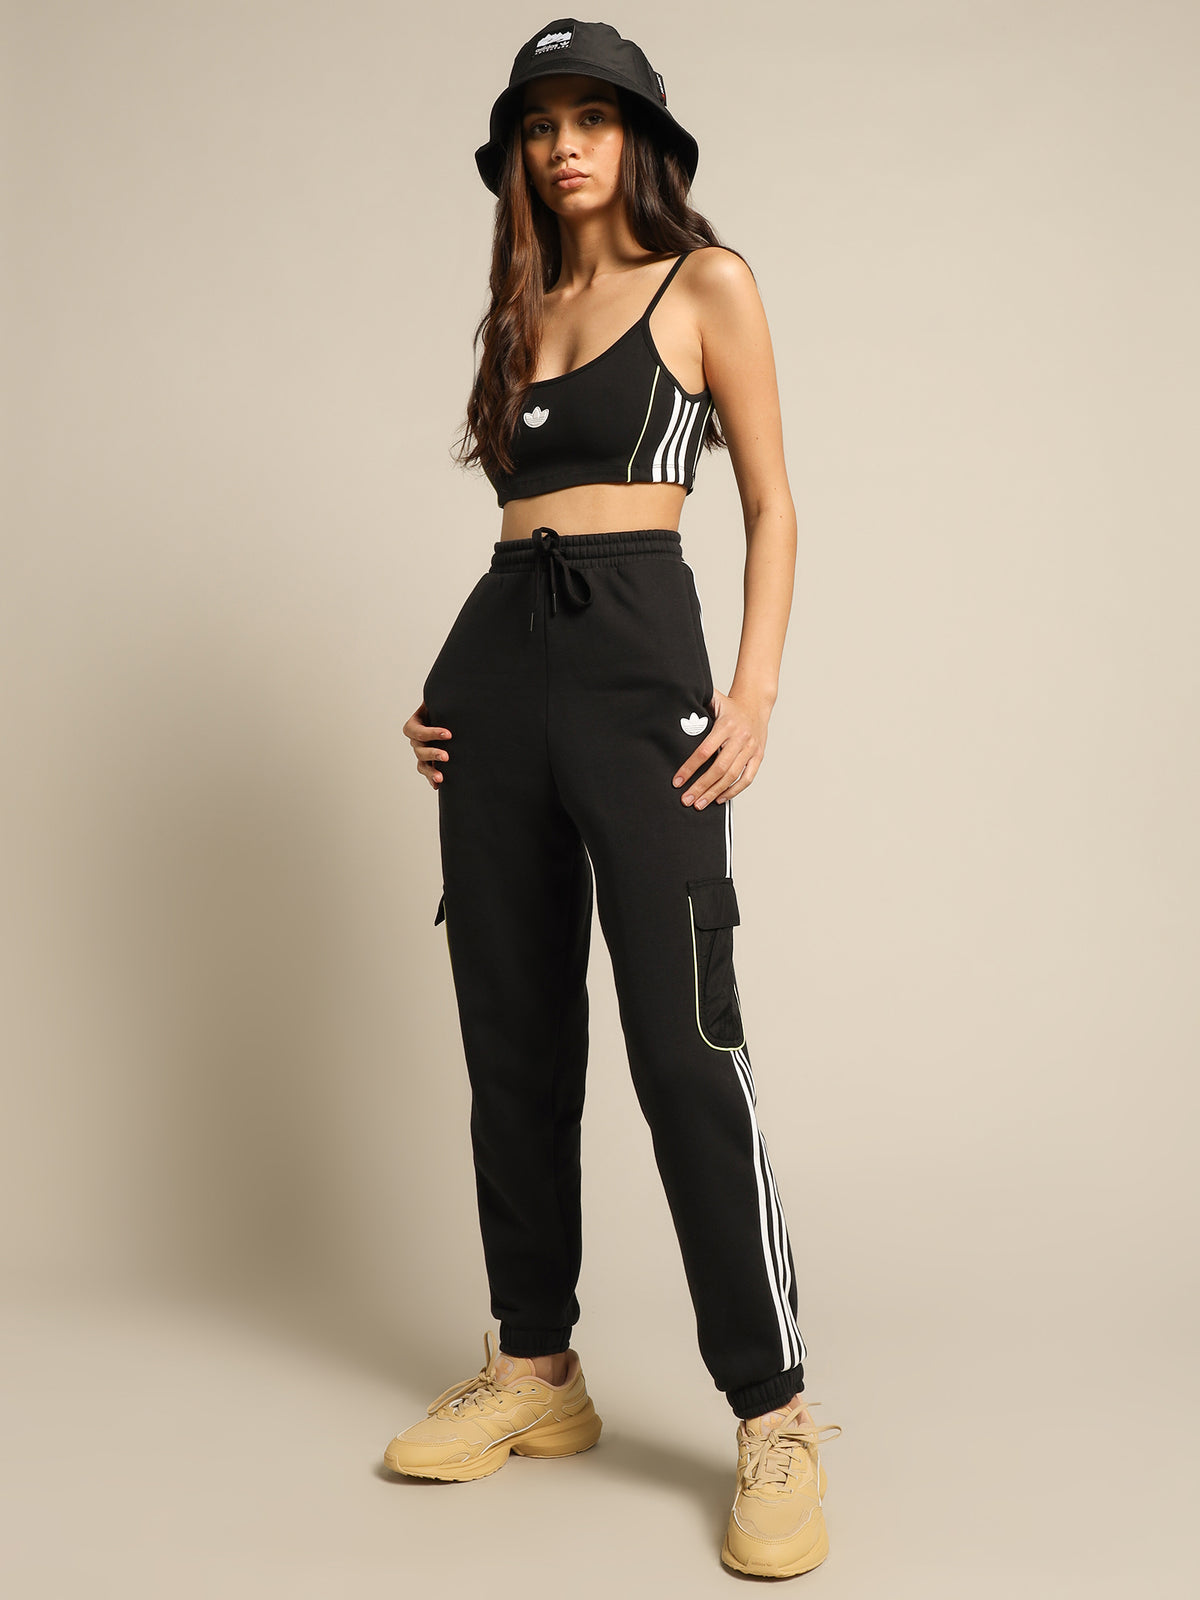 Trefoil Moments Trackpants in Black